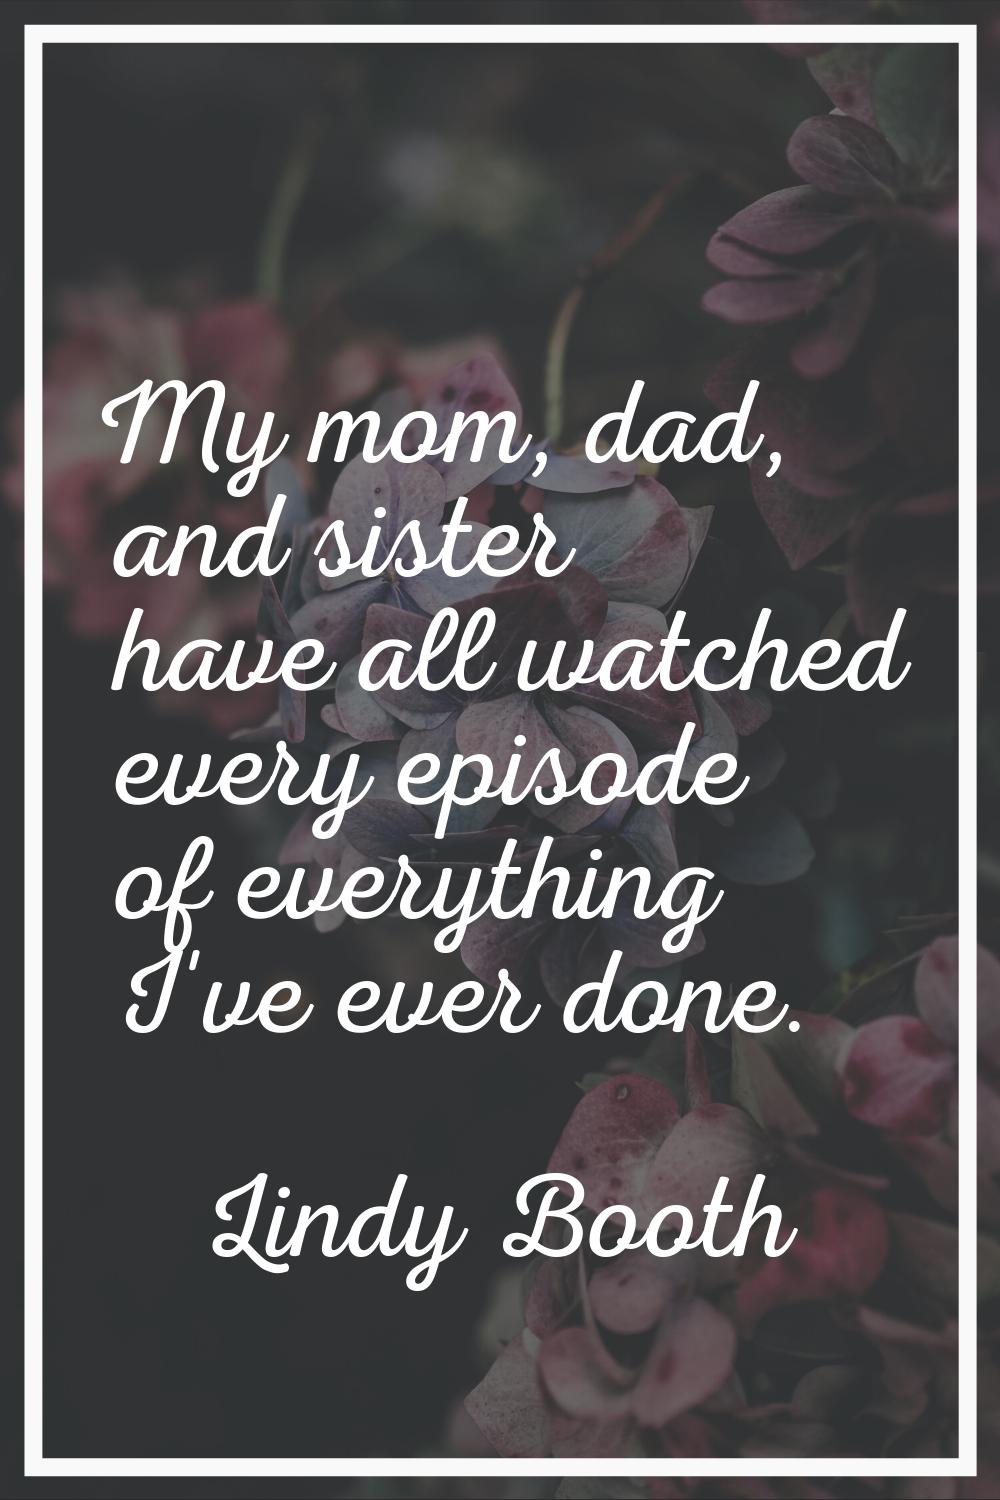 My mom, dad, and sister have all watched every episode of everything I've ever done.